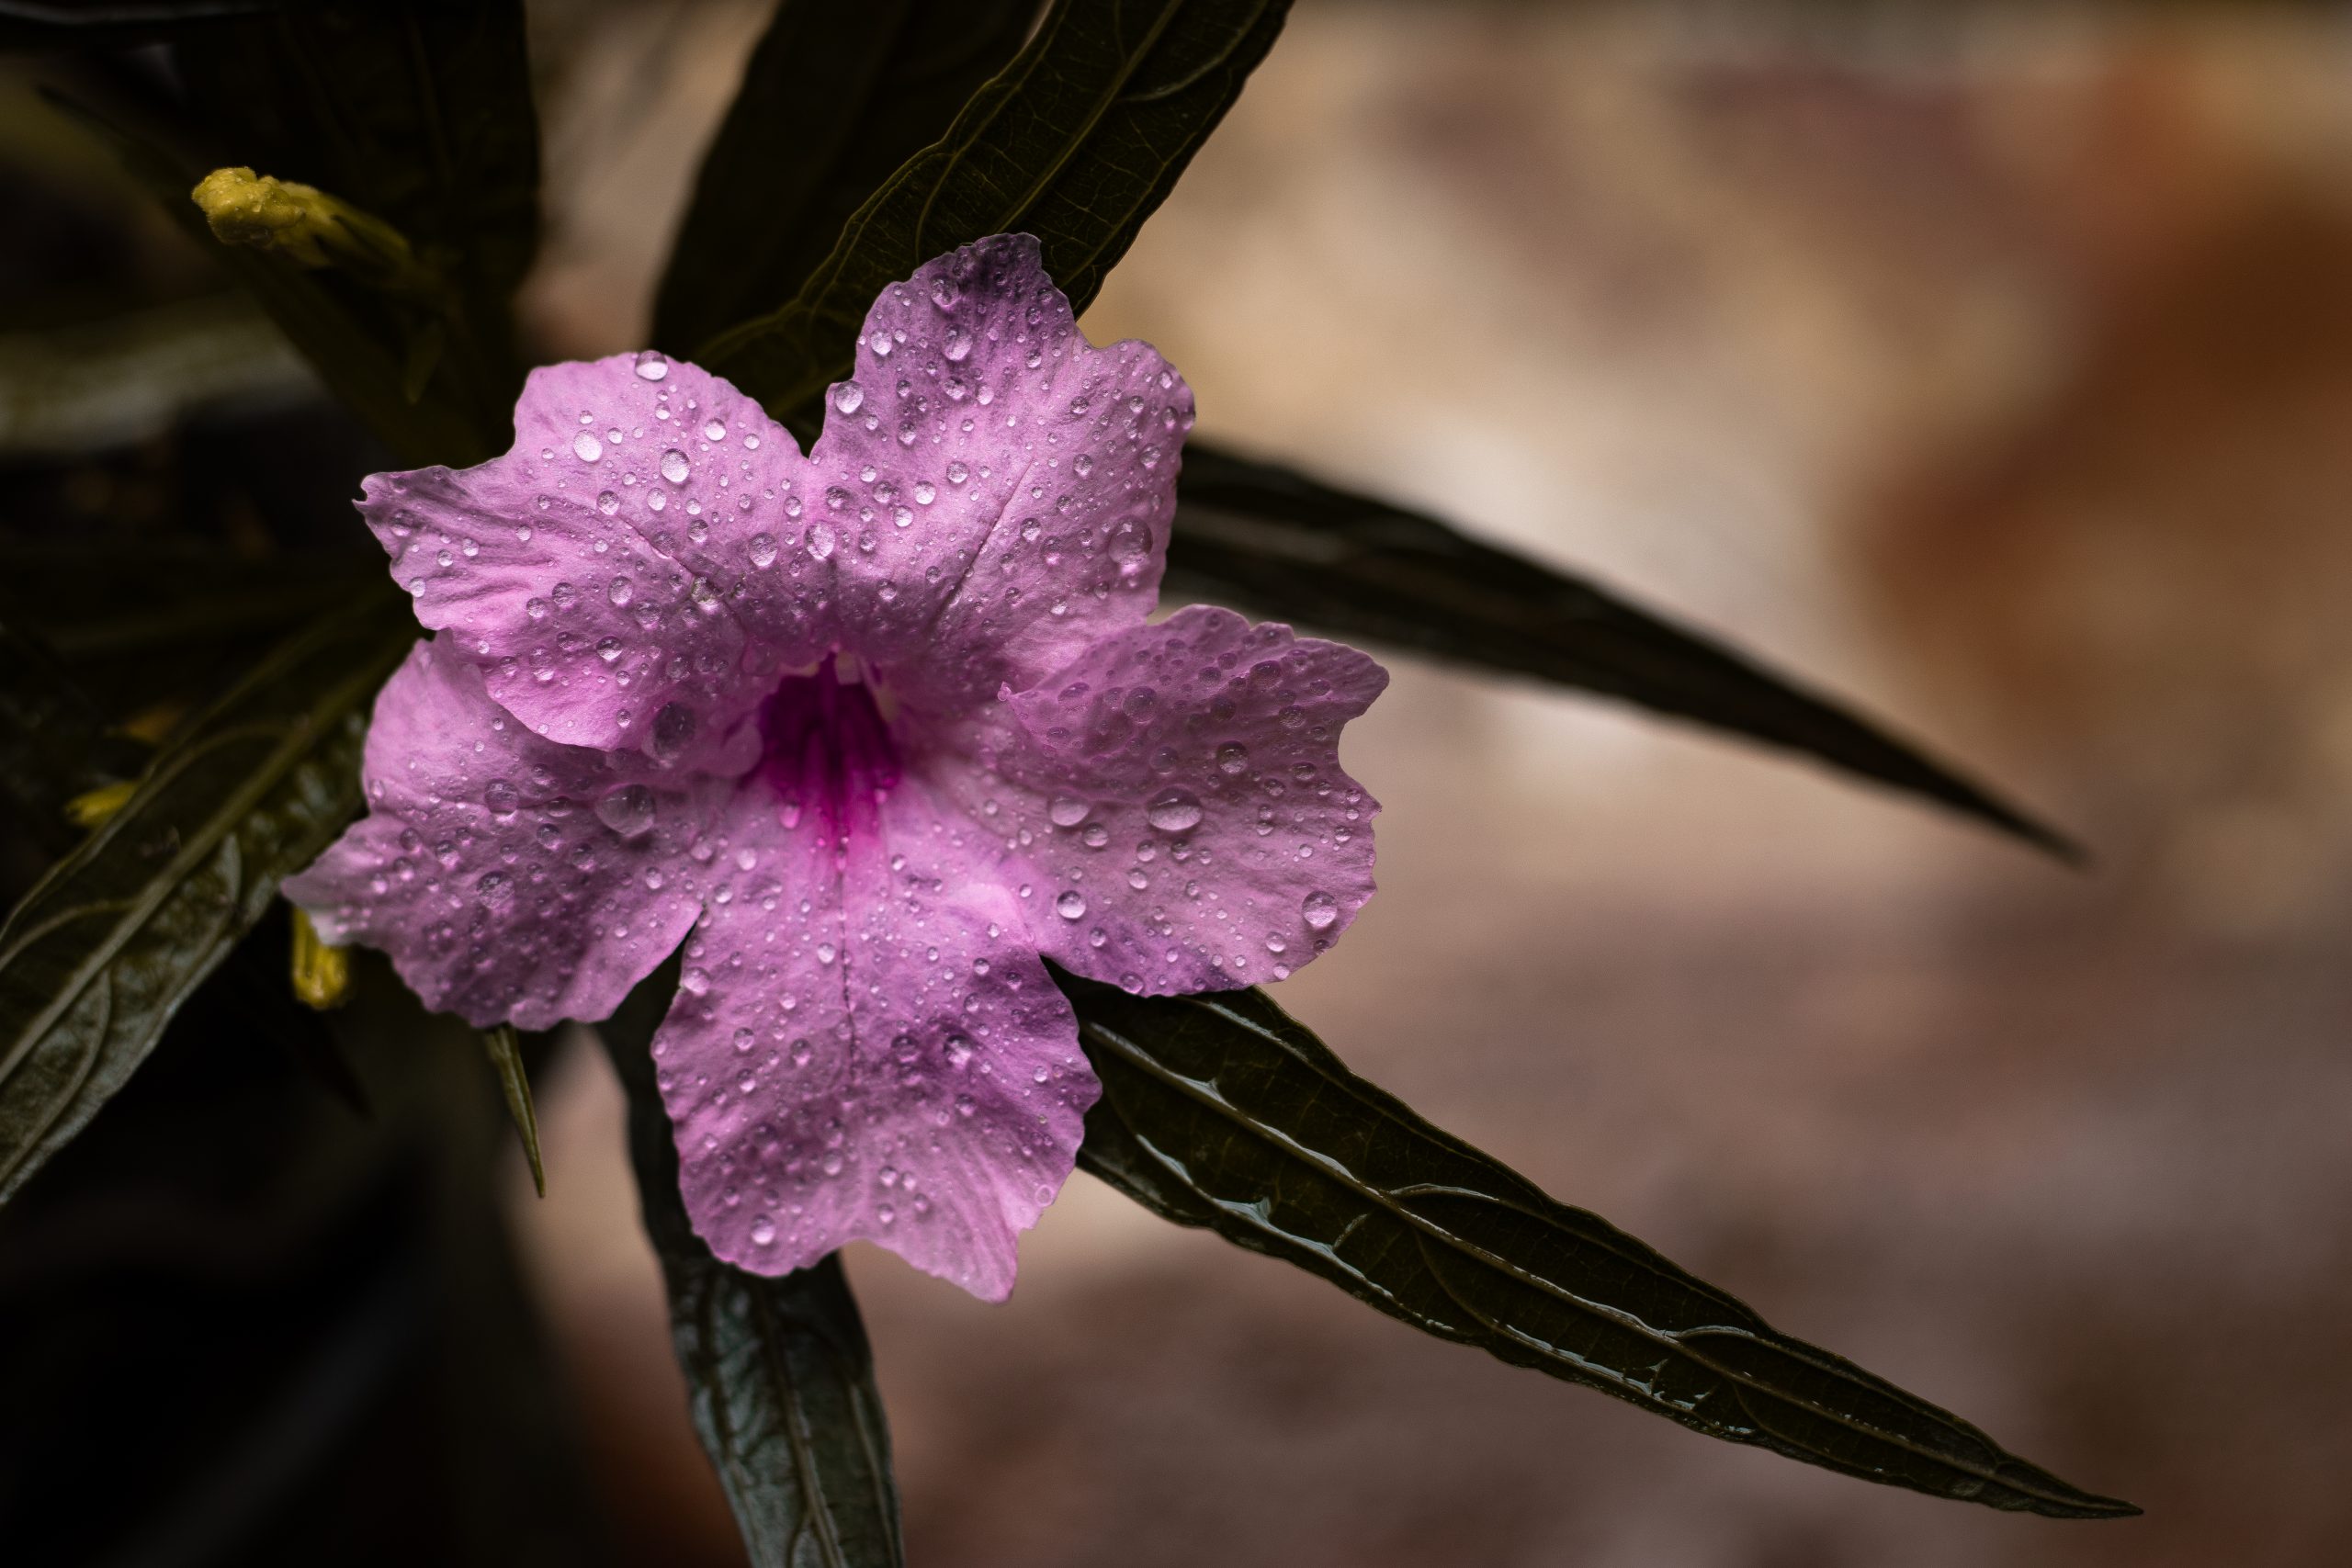 Ruellia flower with droplets